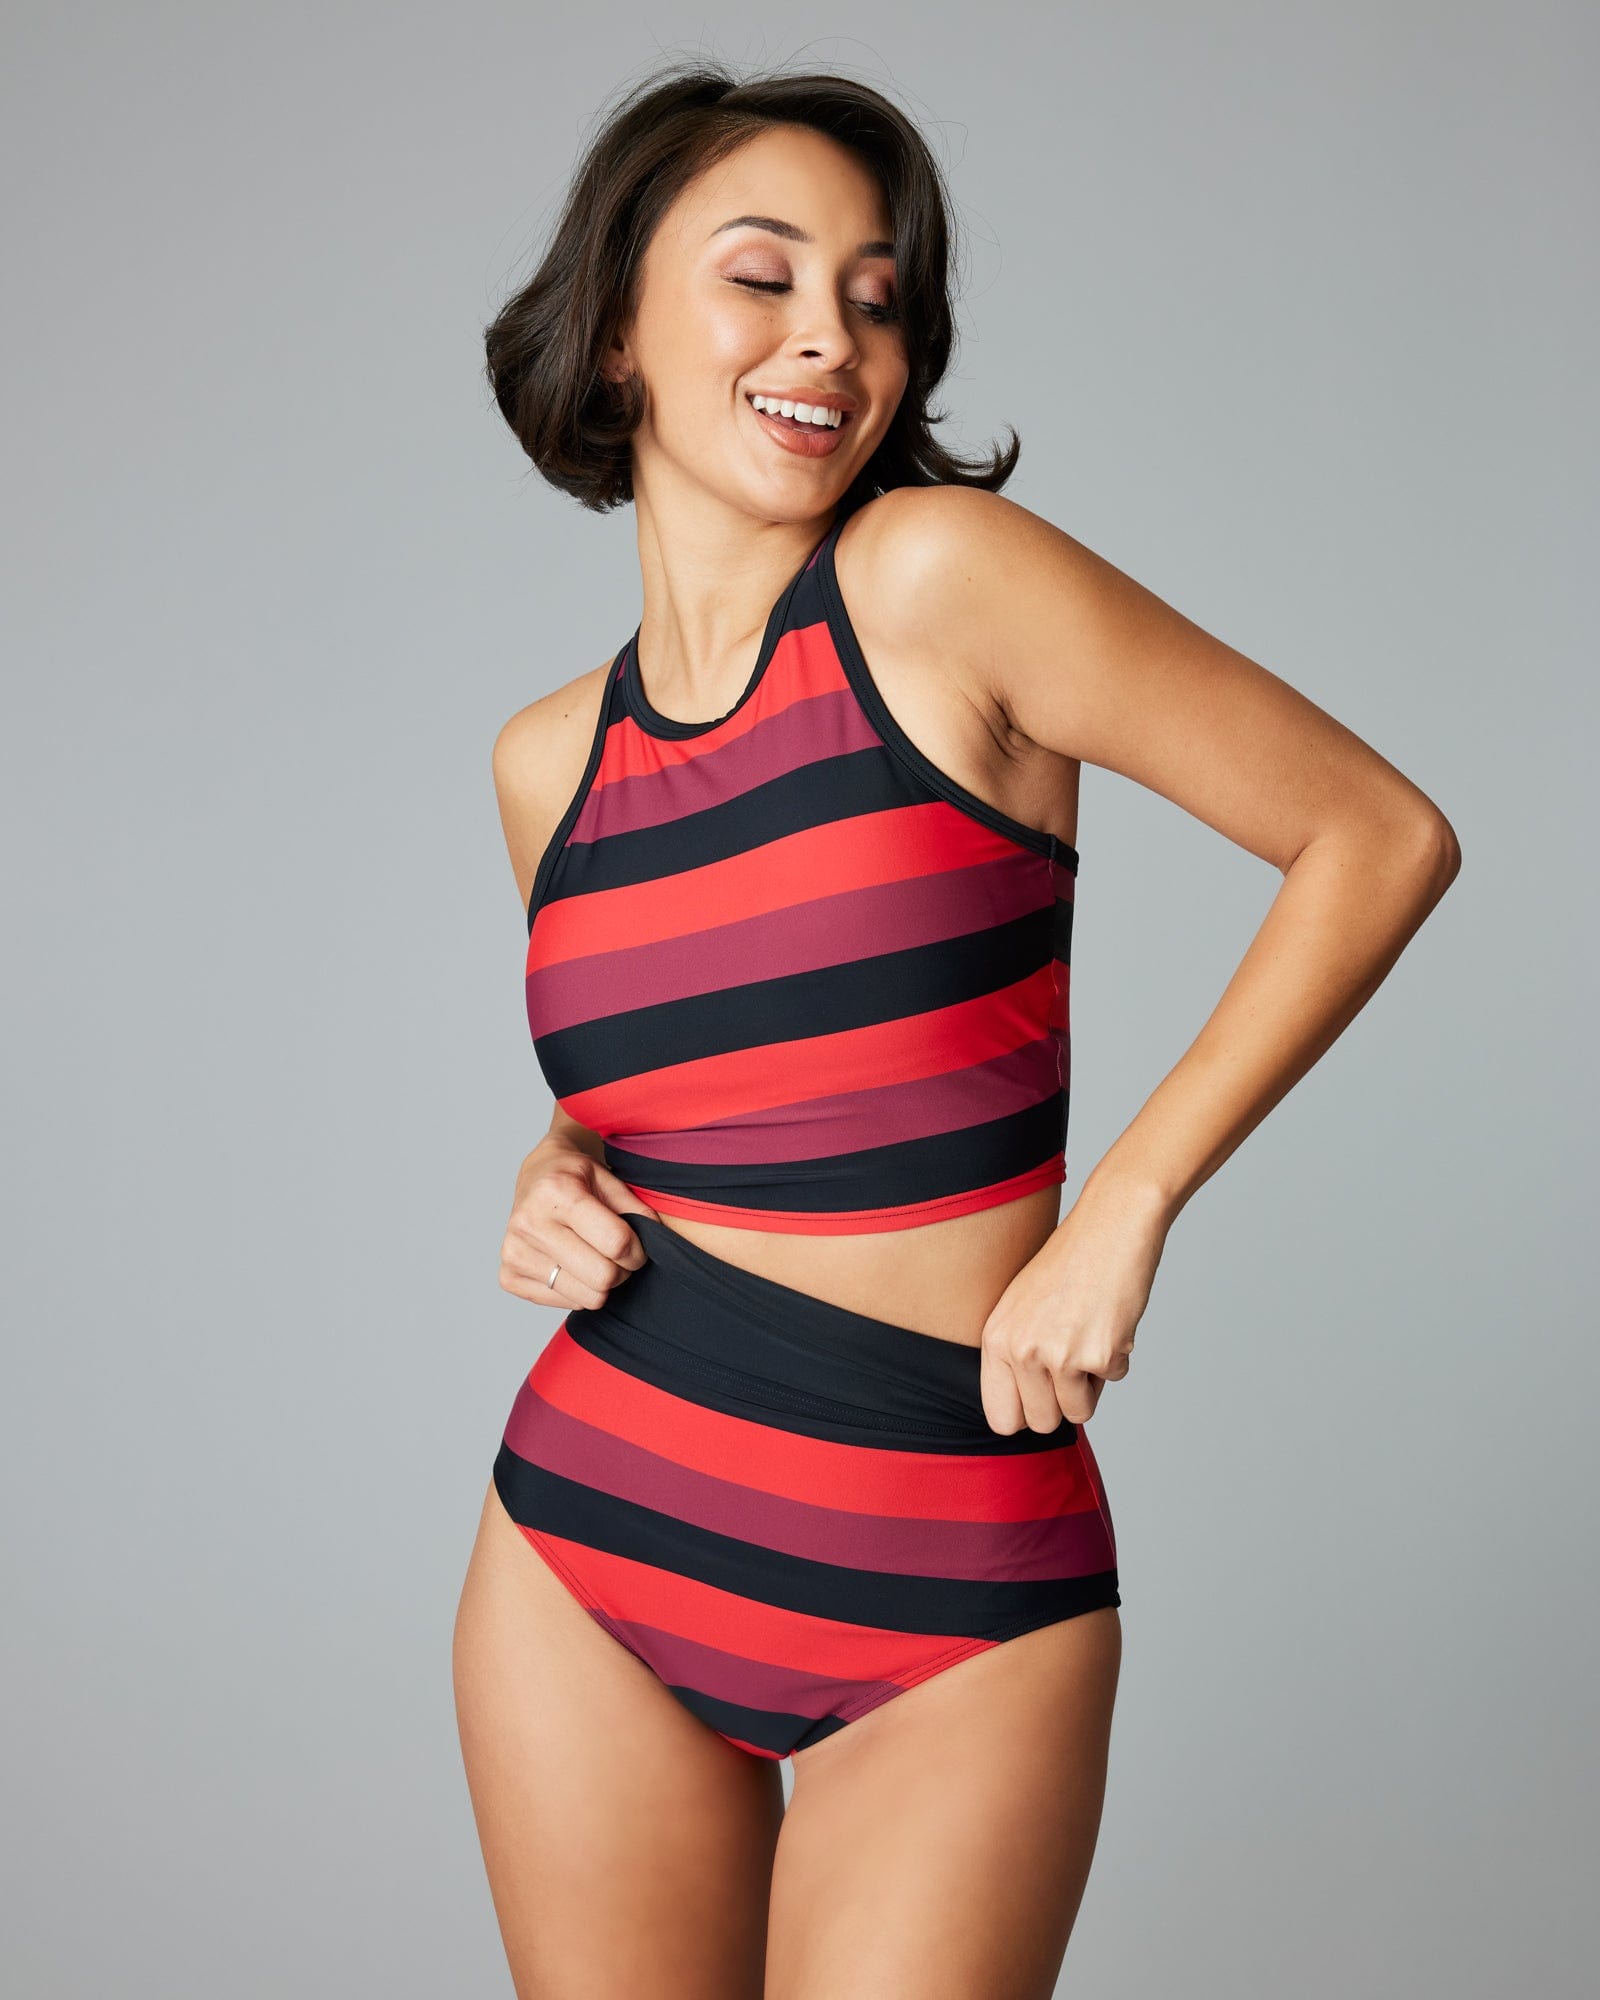 Woman in a two-piece swimsuit with red, plum and black striped bottoms.